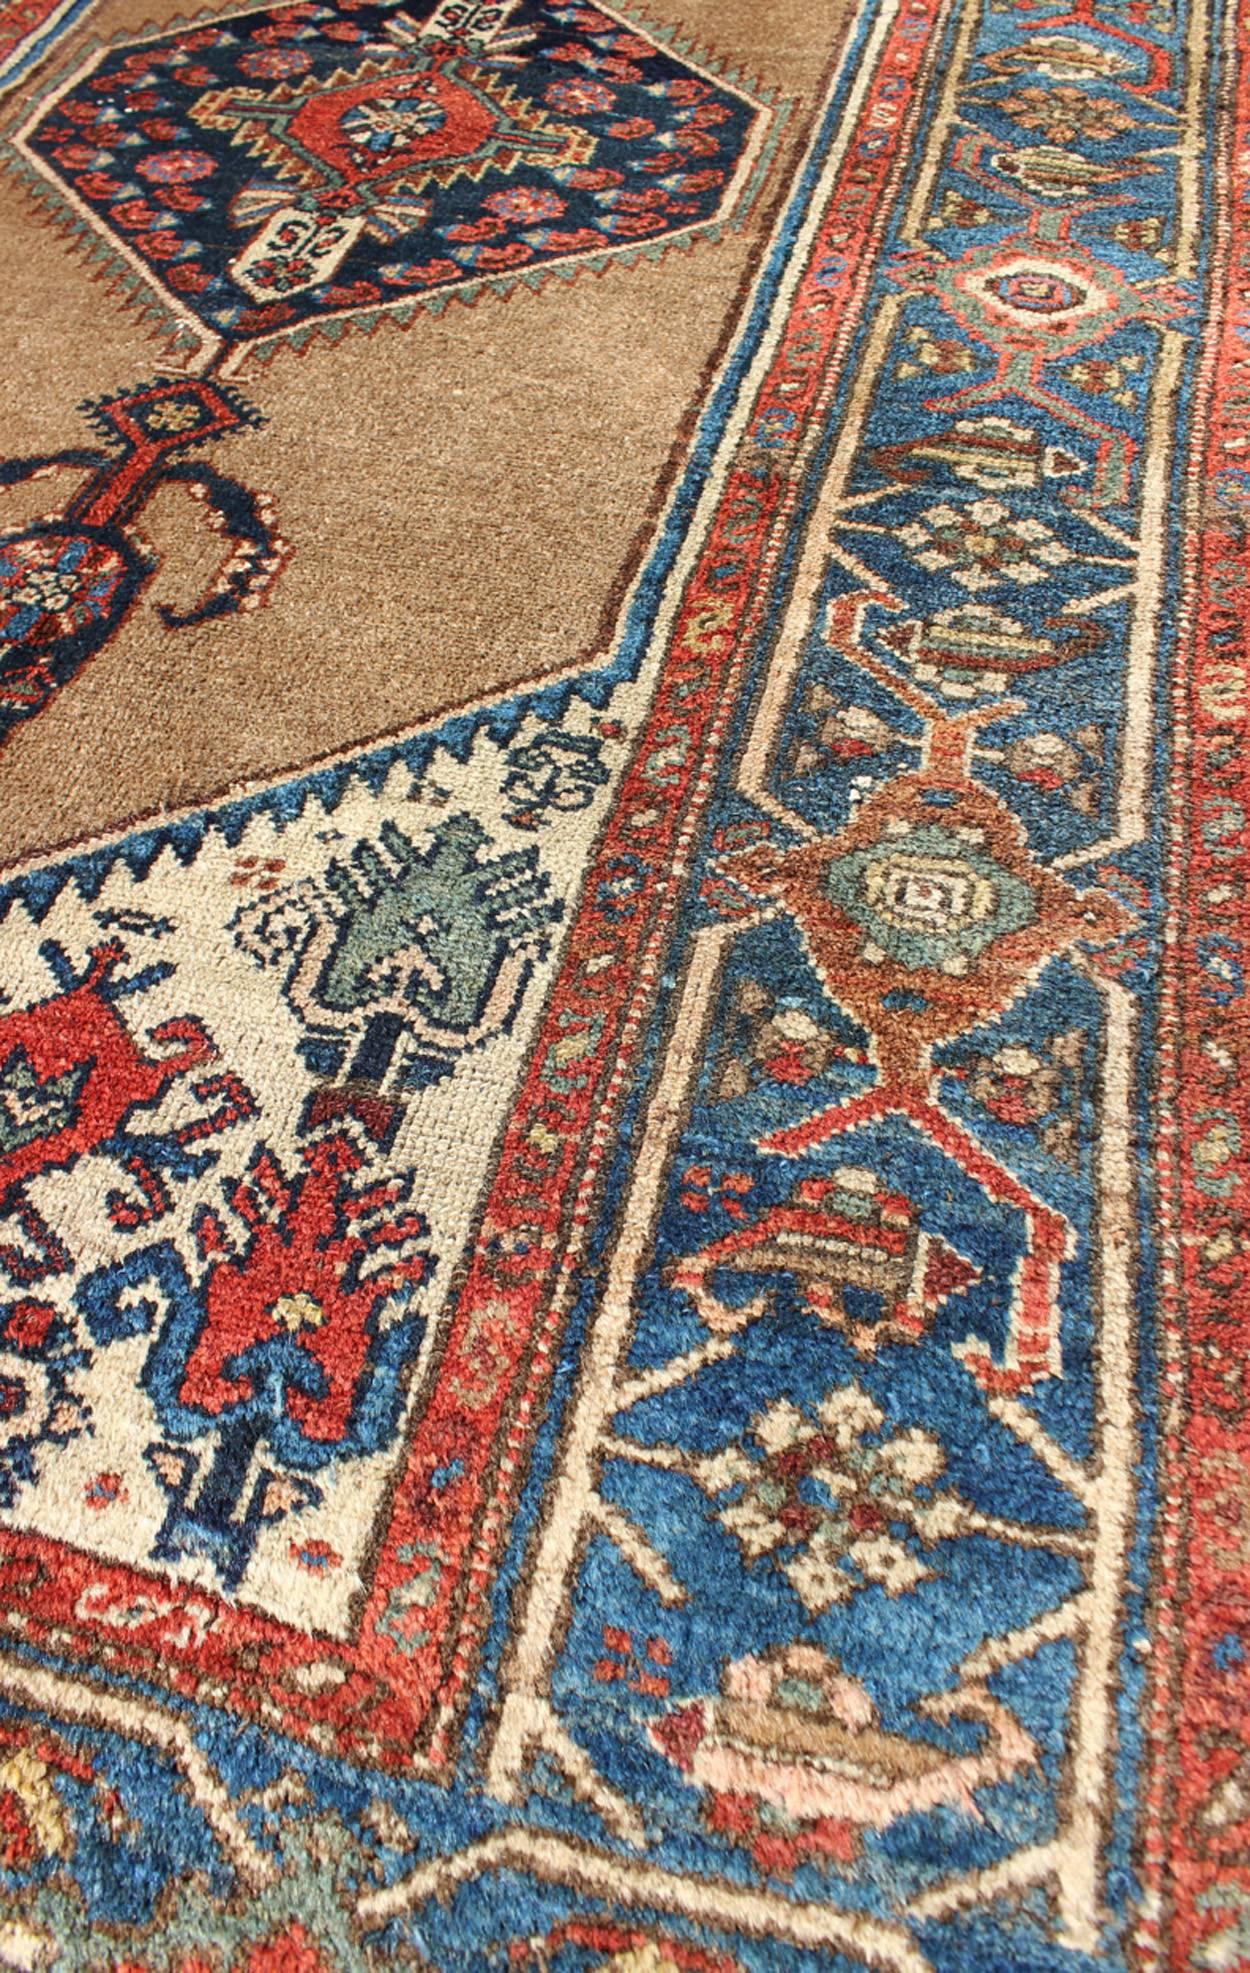 Antique Persian Serab Rug with Stretched Tribal Medallion in Camel, Blue & Ivory In Excellent Condition For Sale In Atlanta, GA